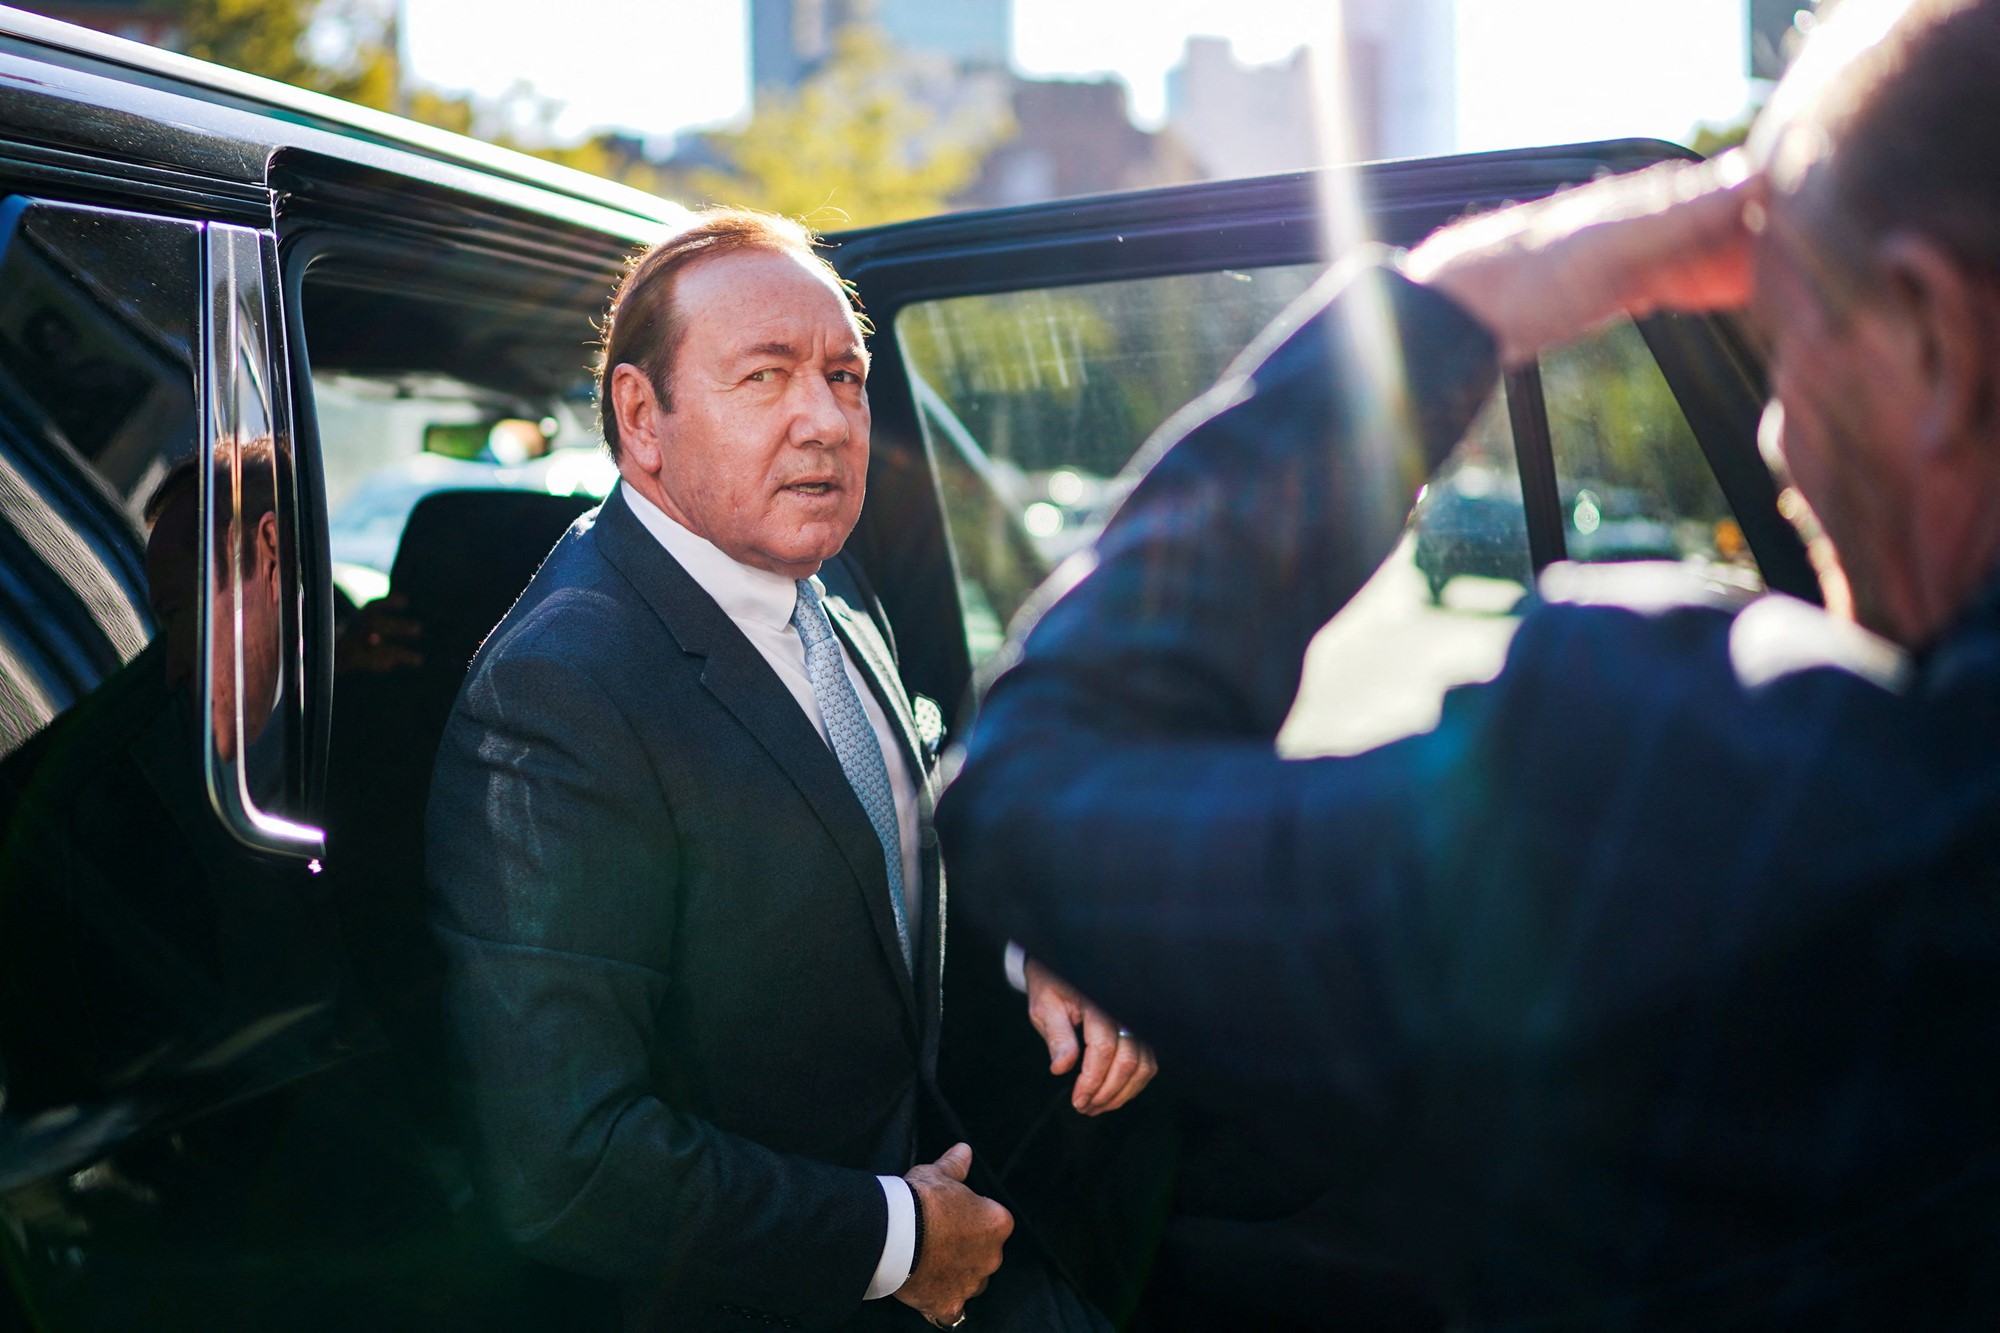 Kevin Spacey steps out of a car.